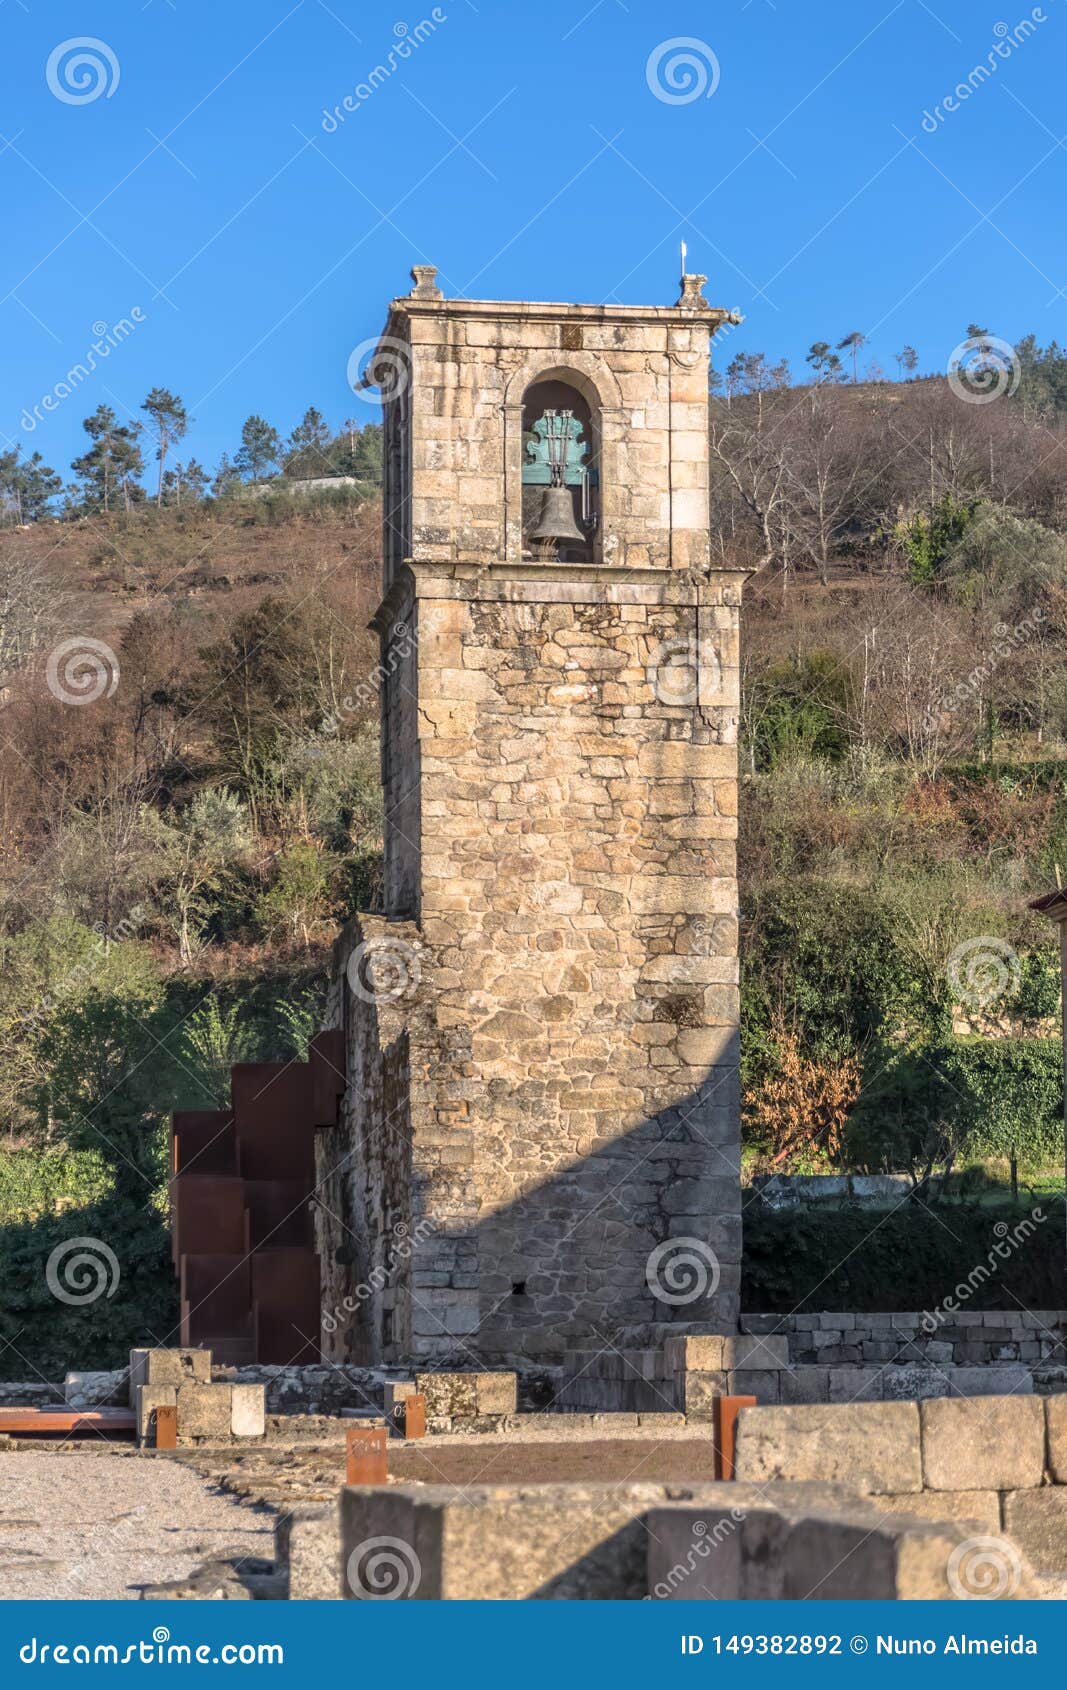 view of historic building in ruins, convent of st. joao of tarouca, detail of tower sineria of the convent of cister